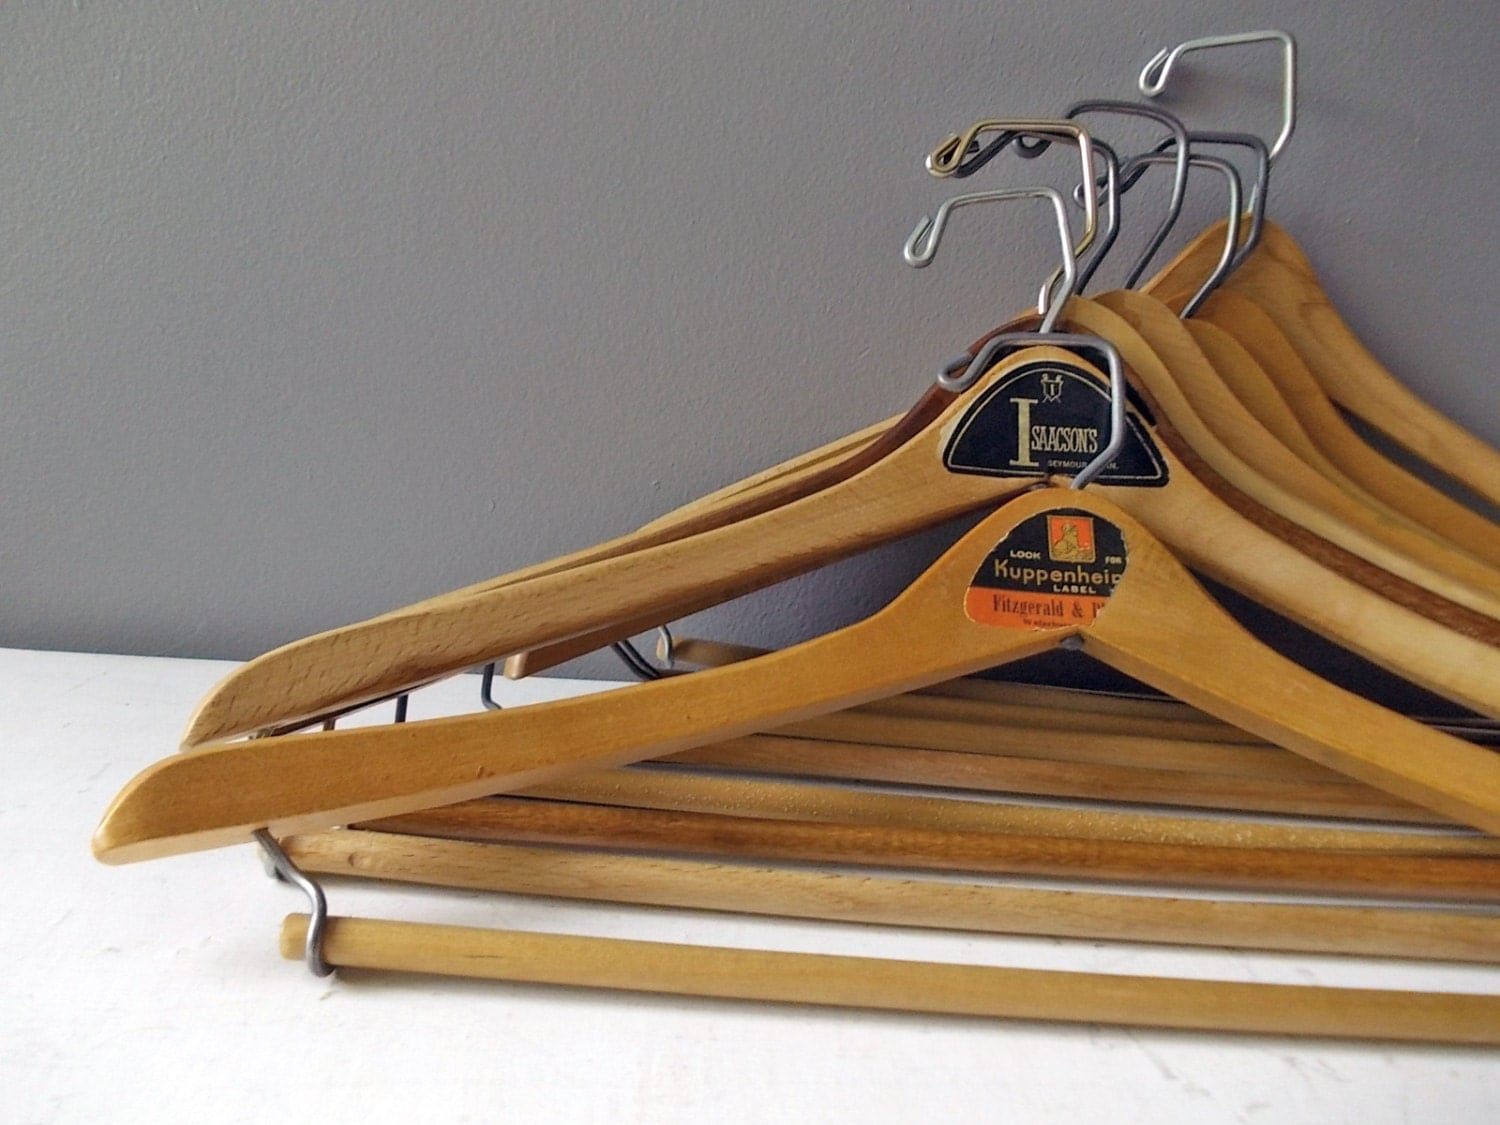 Coat Hangers Directory of Laundry Products, Housekeeping